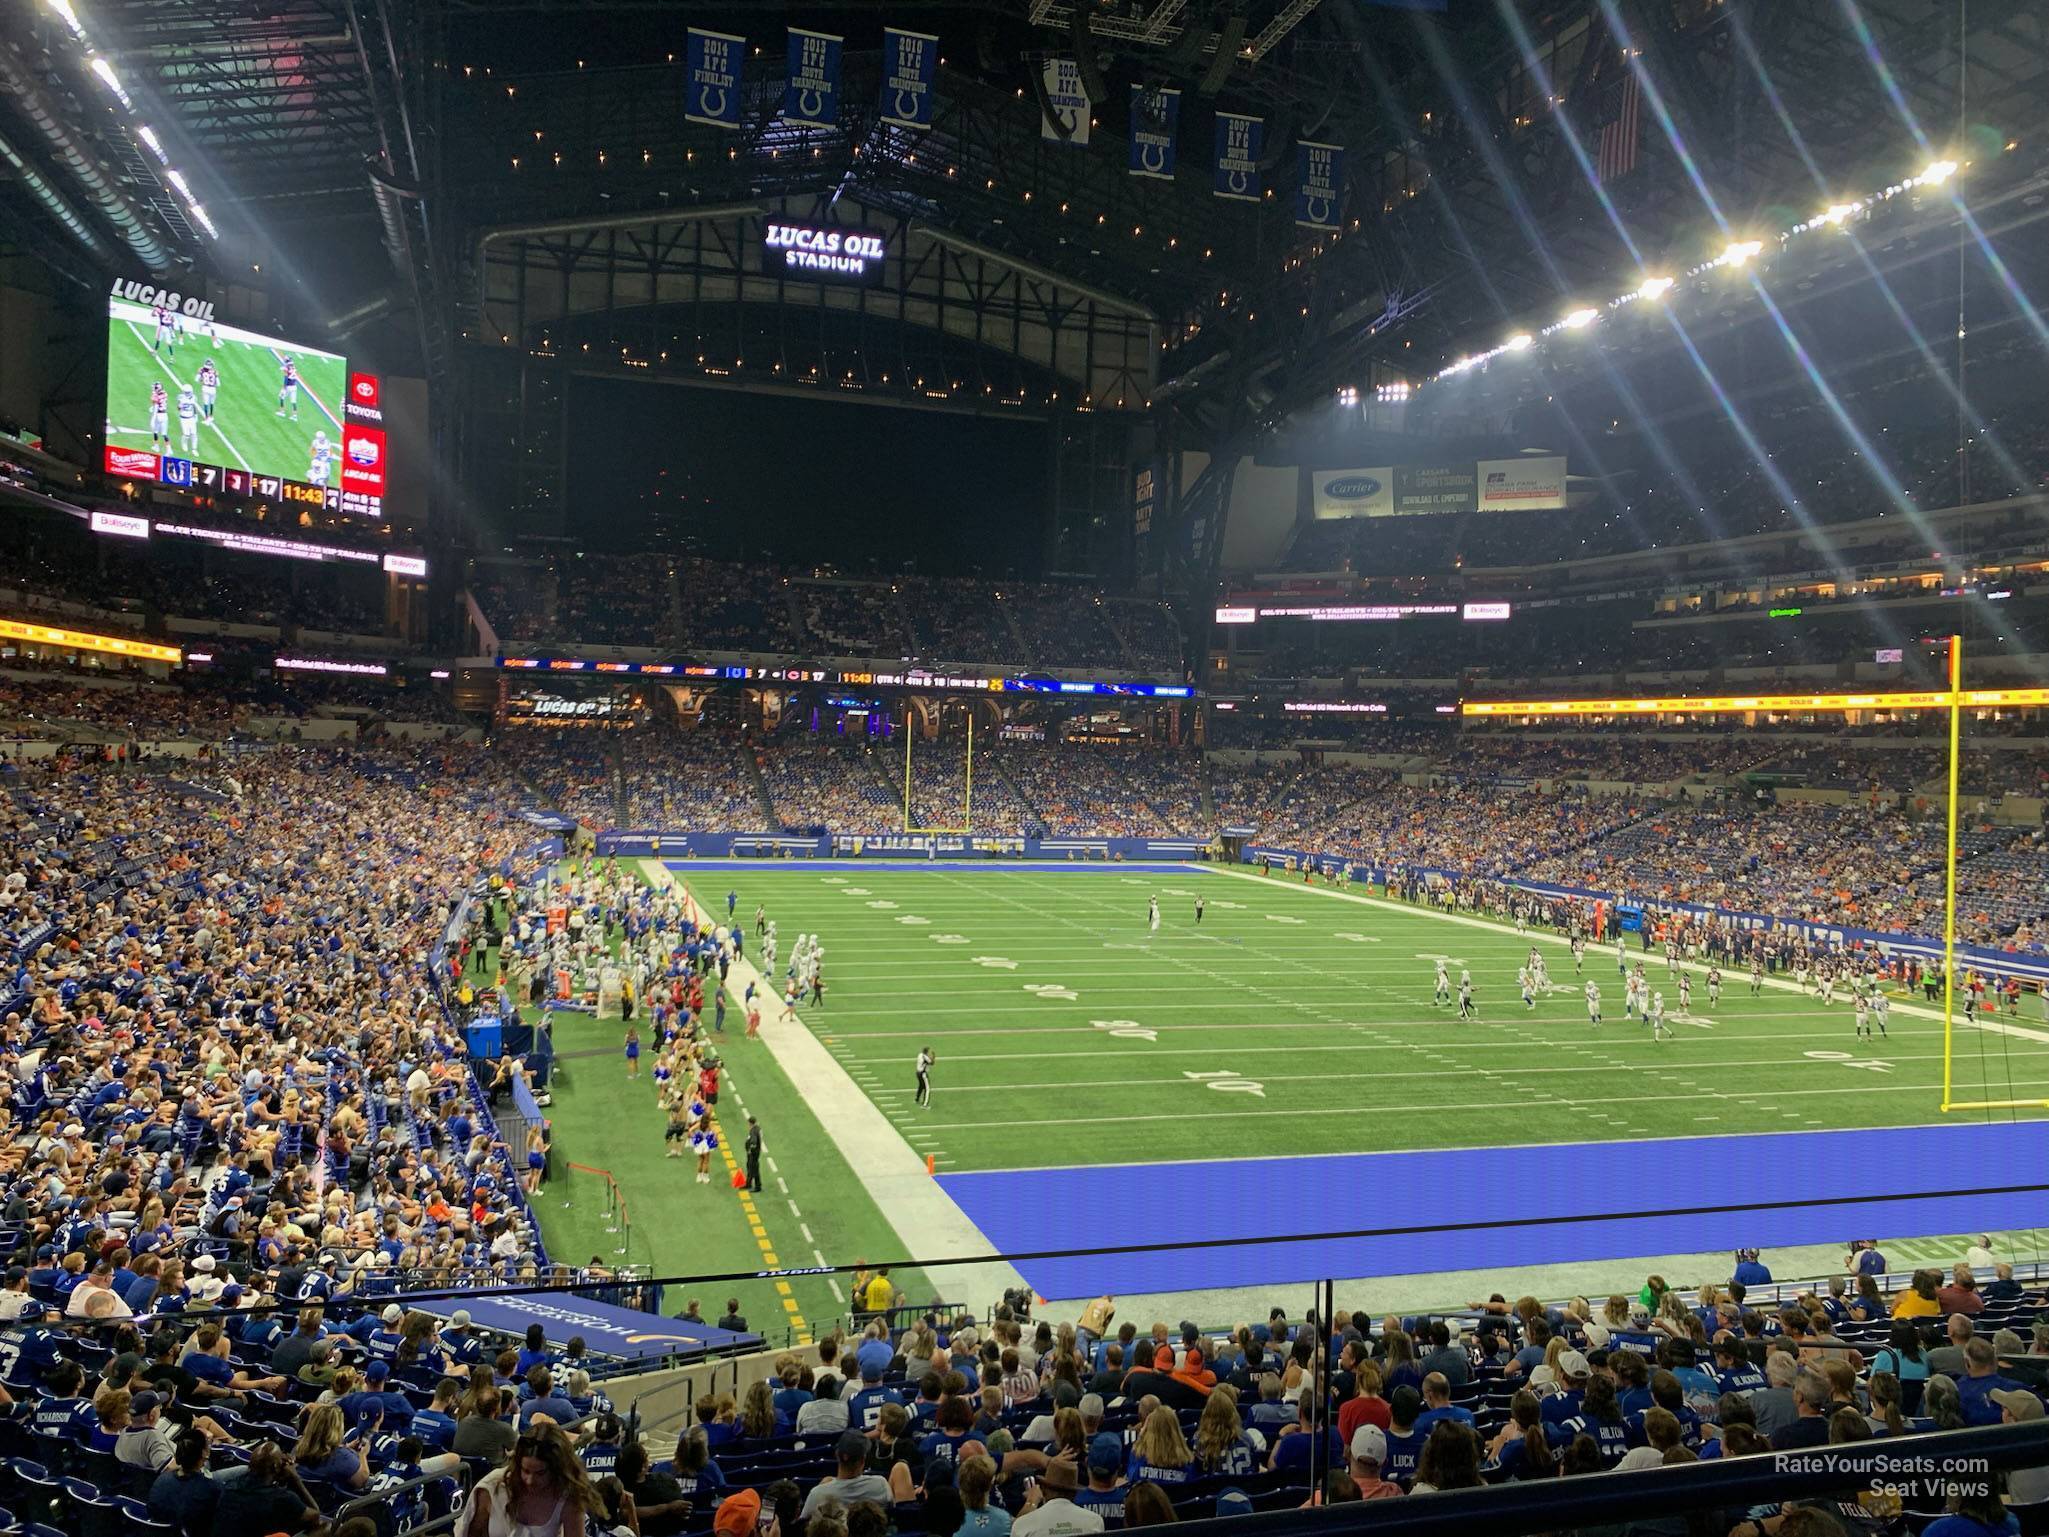 section 230, row 1 seat view  for football - lucas oil stadium